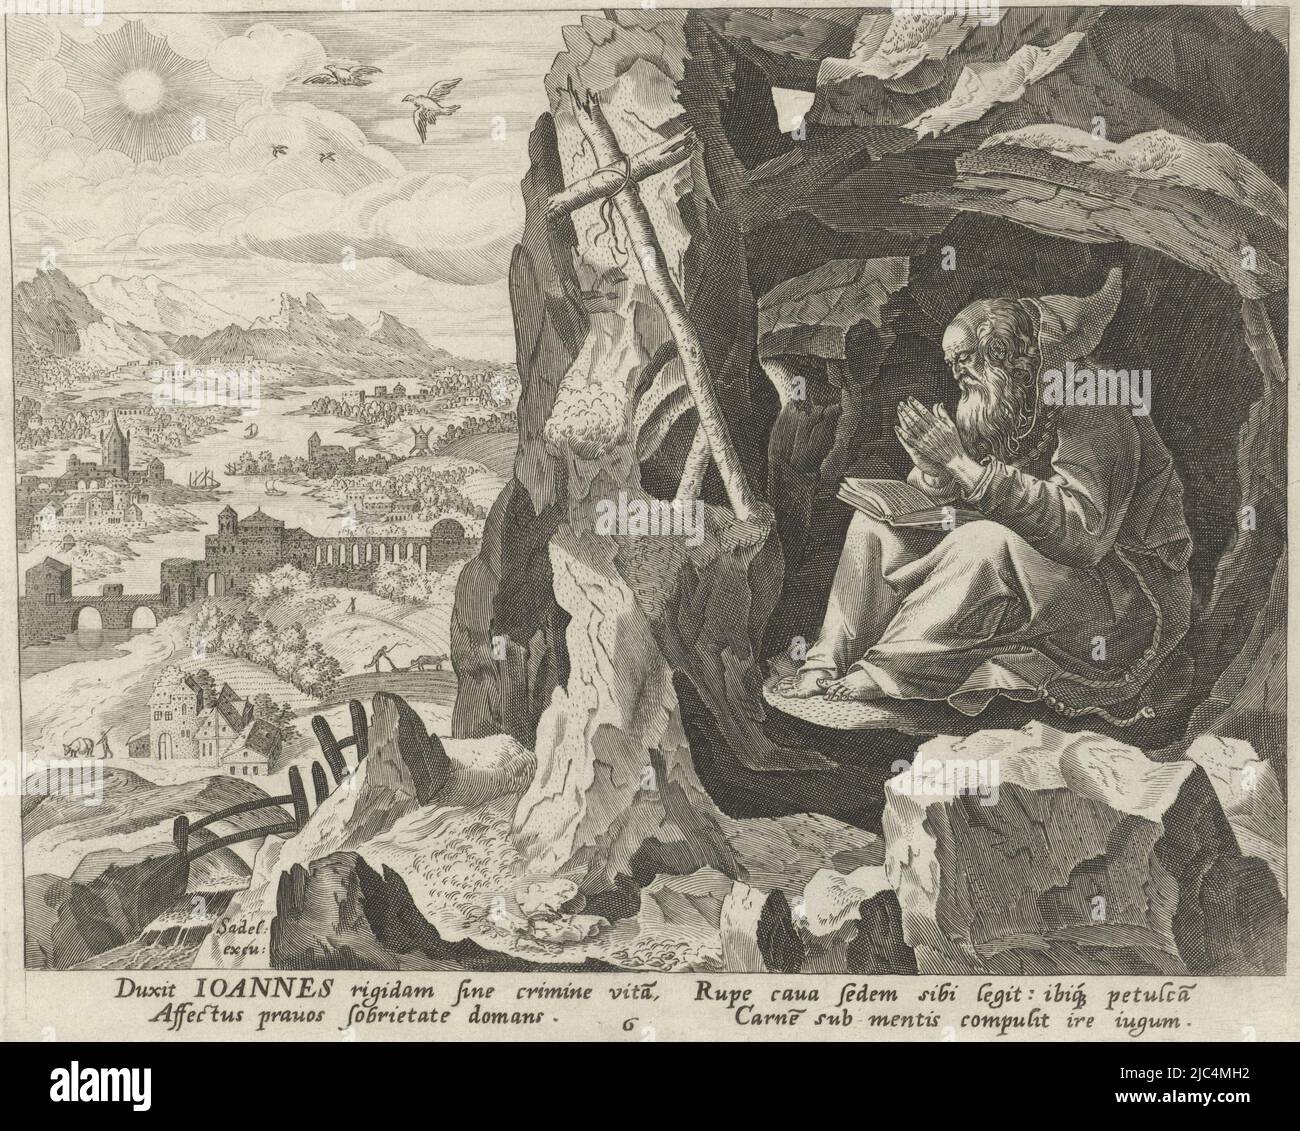 Saint John Cassian in a cave in the desert. He sits before a crucifix and reads a Bible while praying. A landscape in the background, John Cassian as Hermit Male Hermits (series title) Solitudo Sive Vitae Patrum Eremicolarum (series title), print maker: Johann Sadeler (I), print maker: Raphaël Sadeler (I), intermediary draughtsman: Maerten de Vos, Antwerp, (possibly), 1583 - 1588, paper, engraving, h 175 mm × w 216 mm Stock Photo